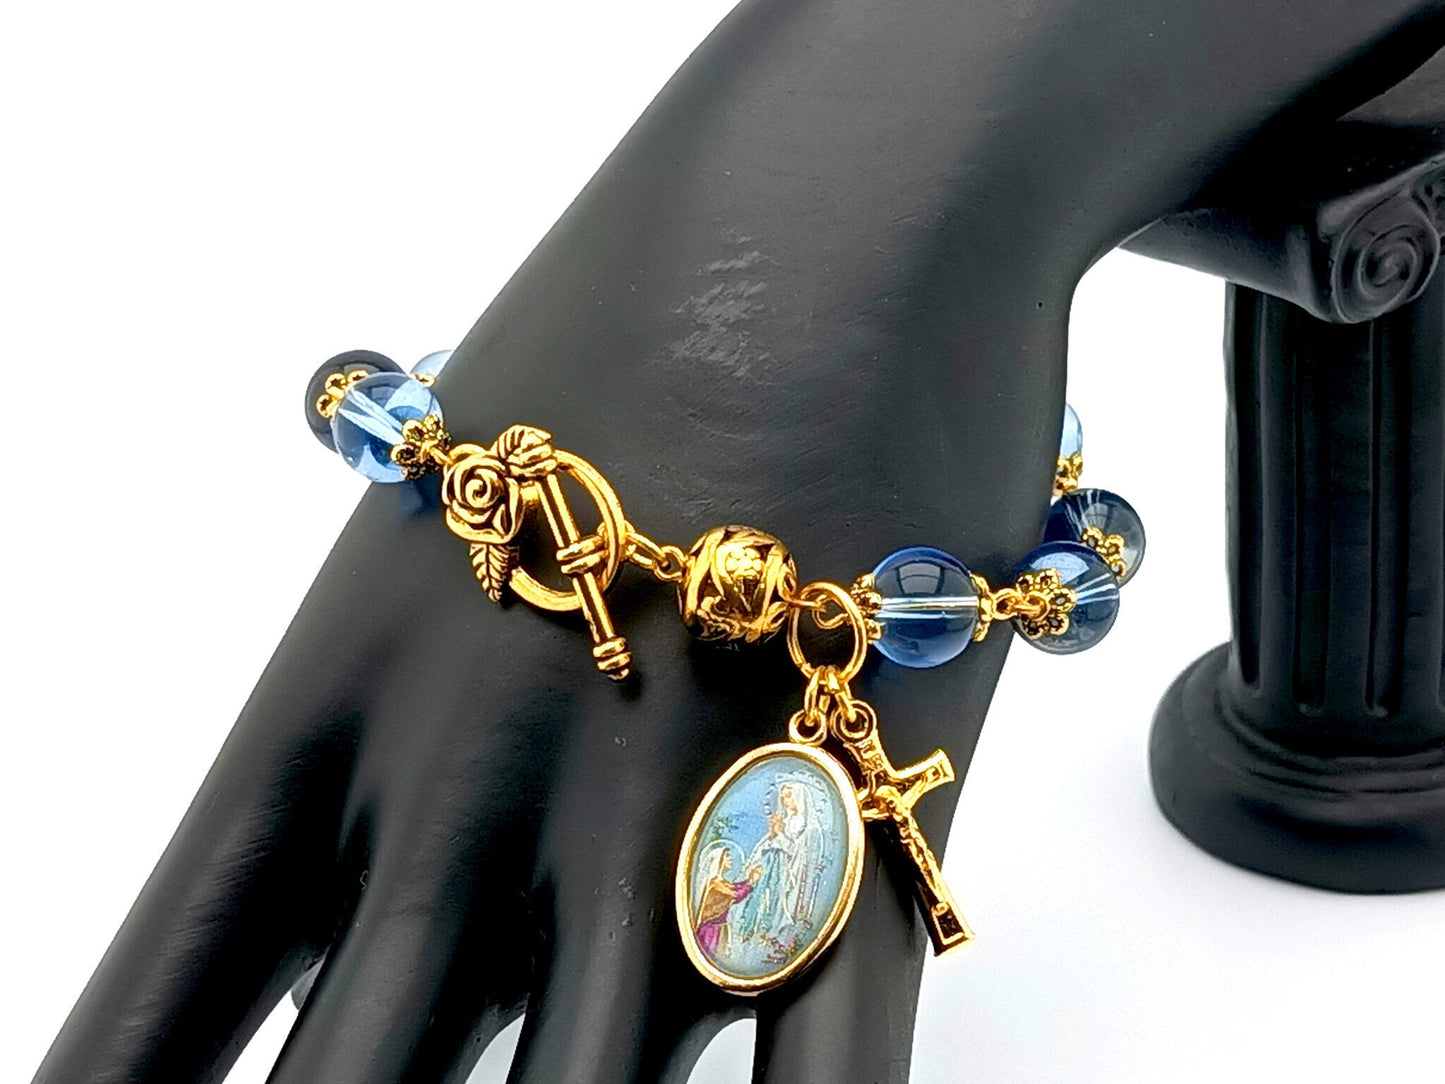 Our Lady of Lourdesunique rosary beads single decade rosary bracelet with gold and blue glass beads and gold crucifix.